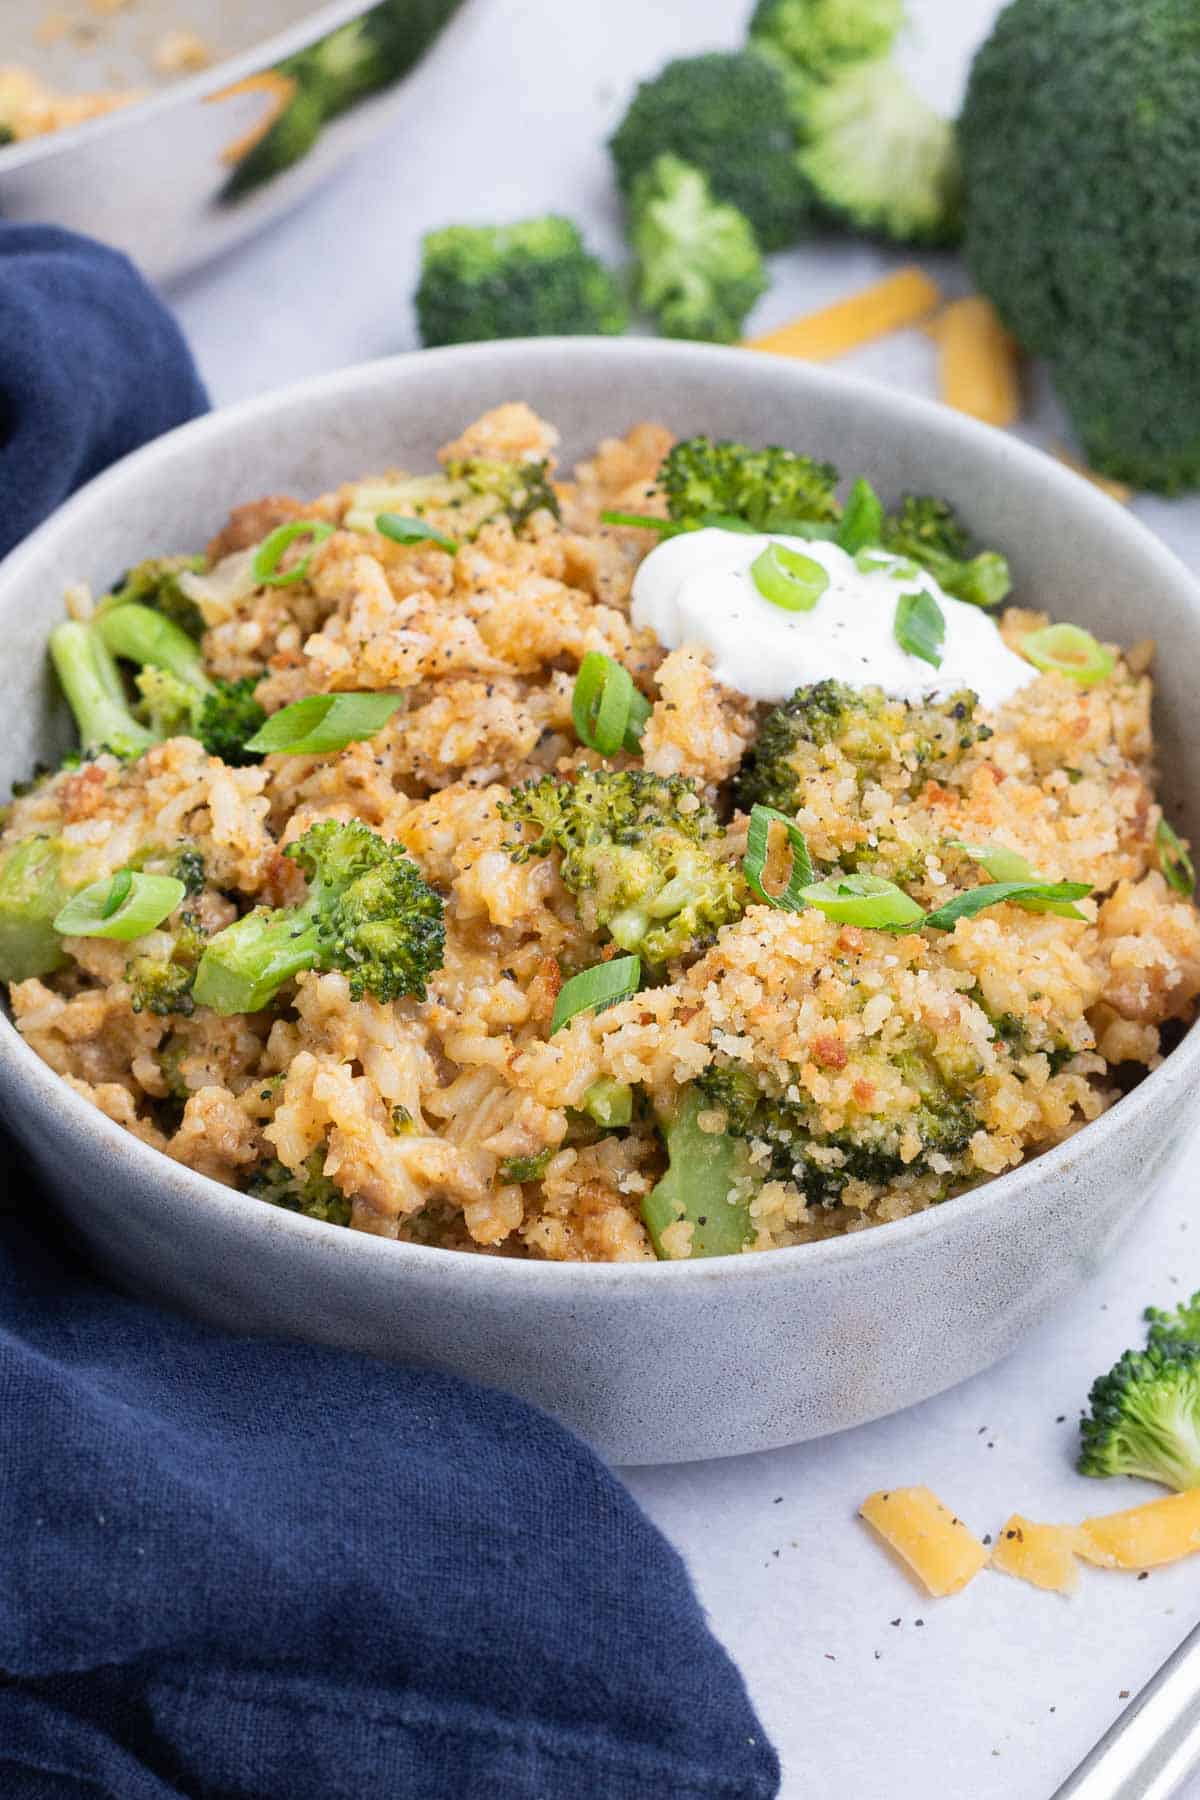 This cheesy broccoli and rice recipe is served up in a white bowl.